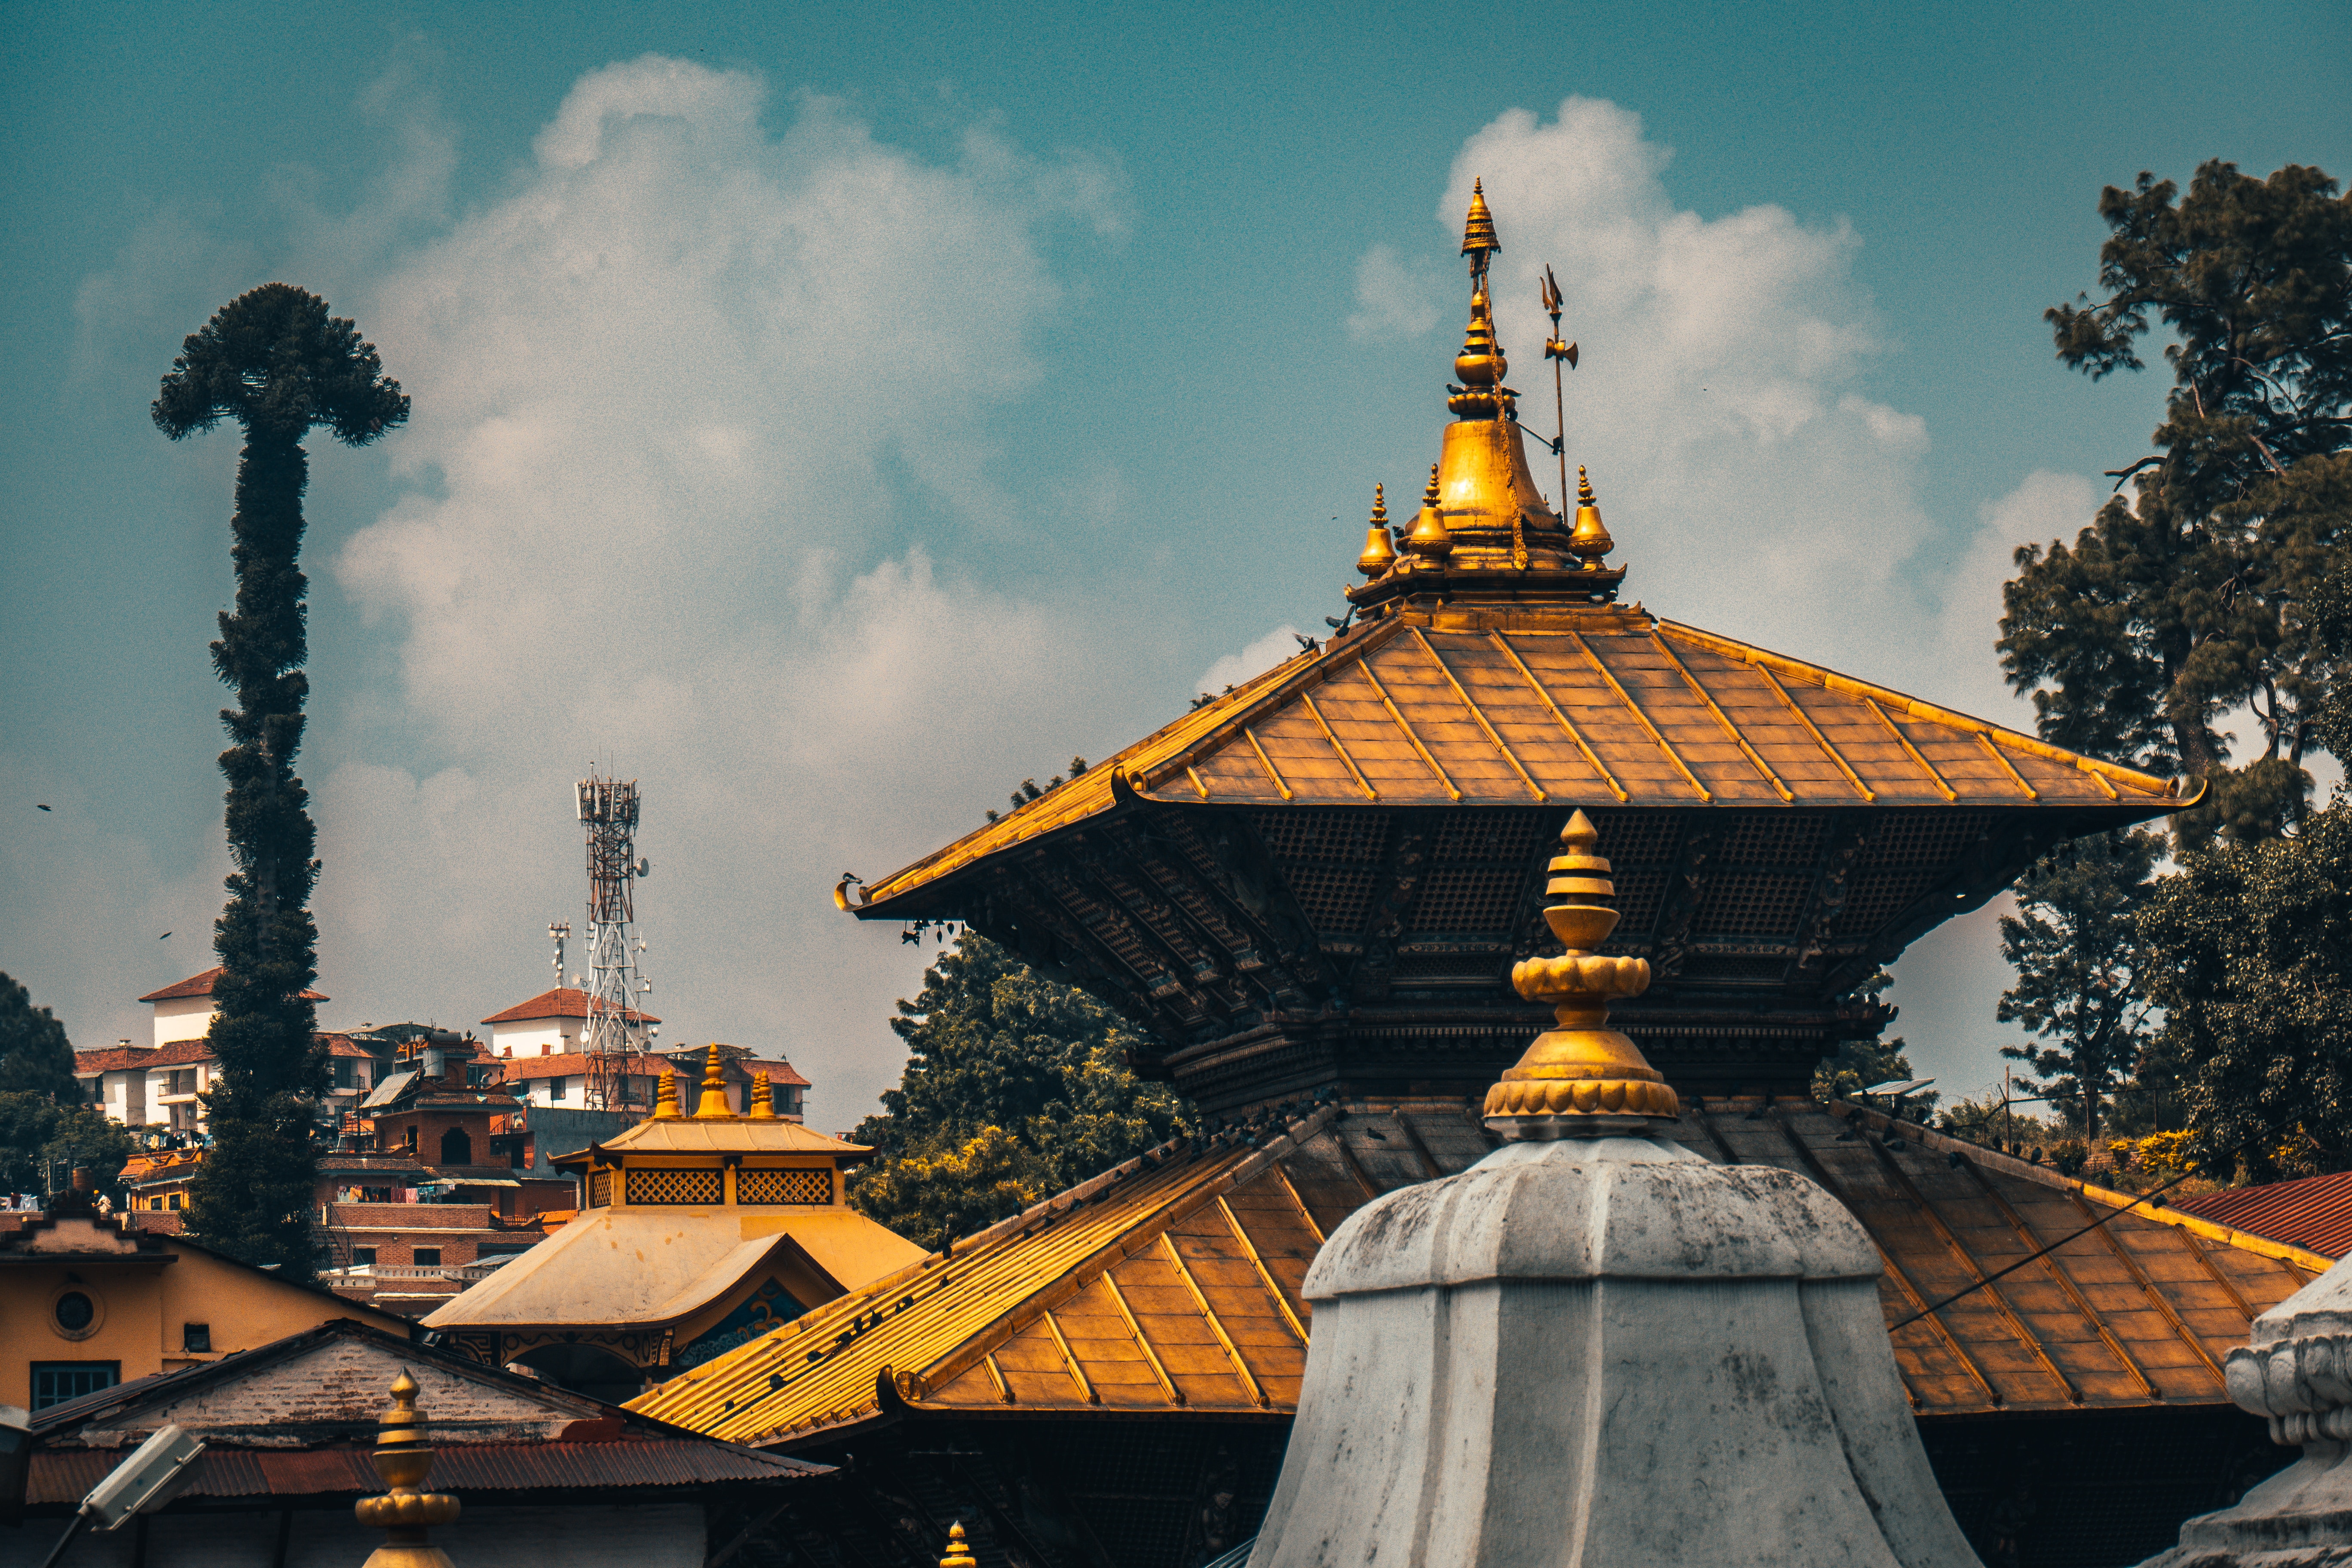 Full day sightseeing at UNESCO Heritage site. Sightseeing at Pasupatinath temple; holy temple of Hindu. Bhaktapur city; oldest city of Nepal and Bouddha stupa. Overnight at  boutique hotel in Kathmandu.'